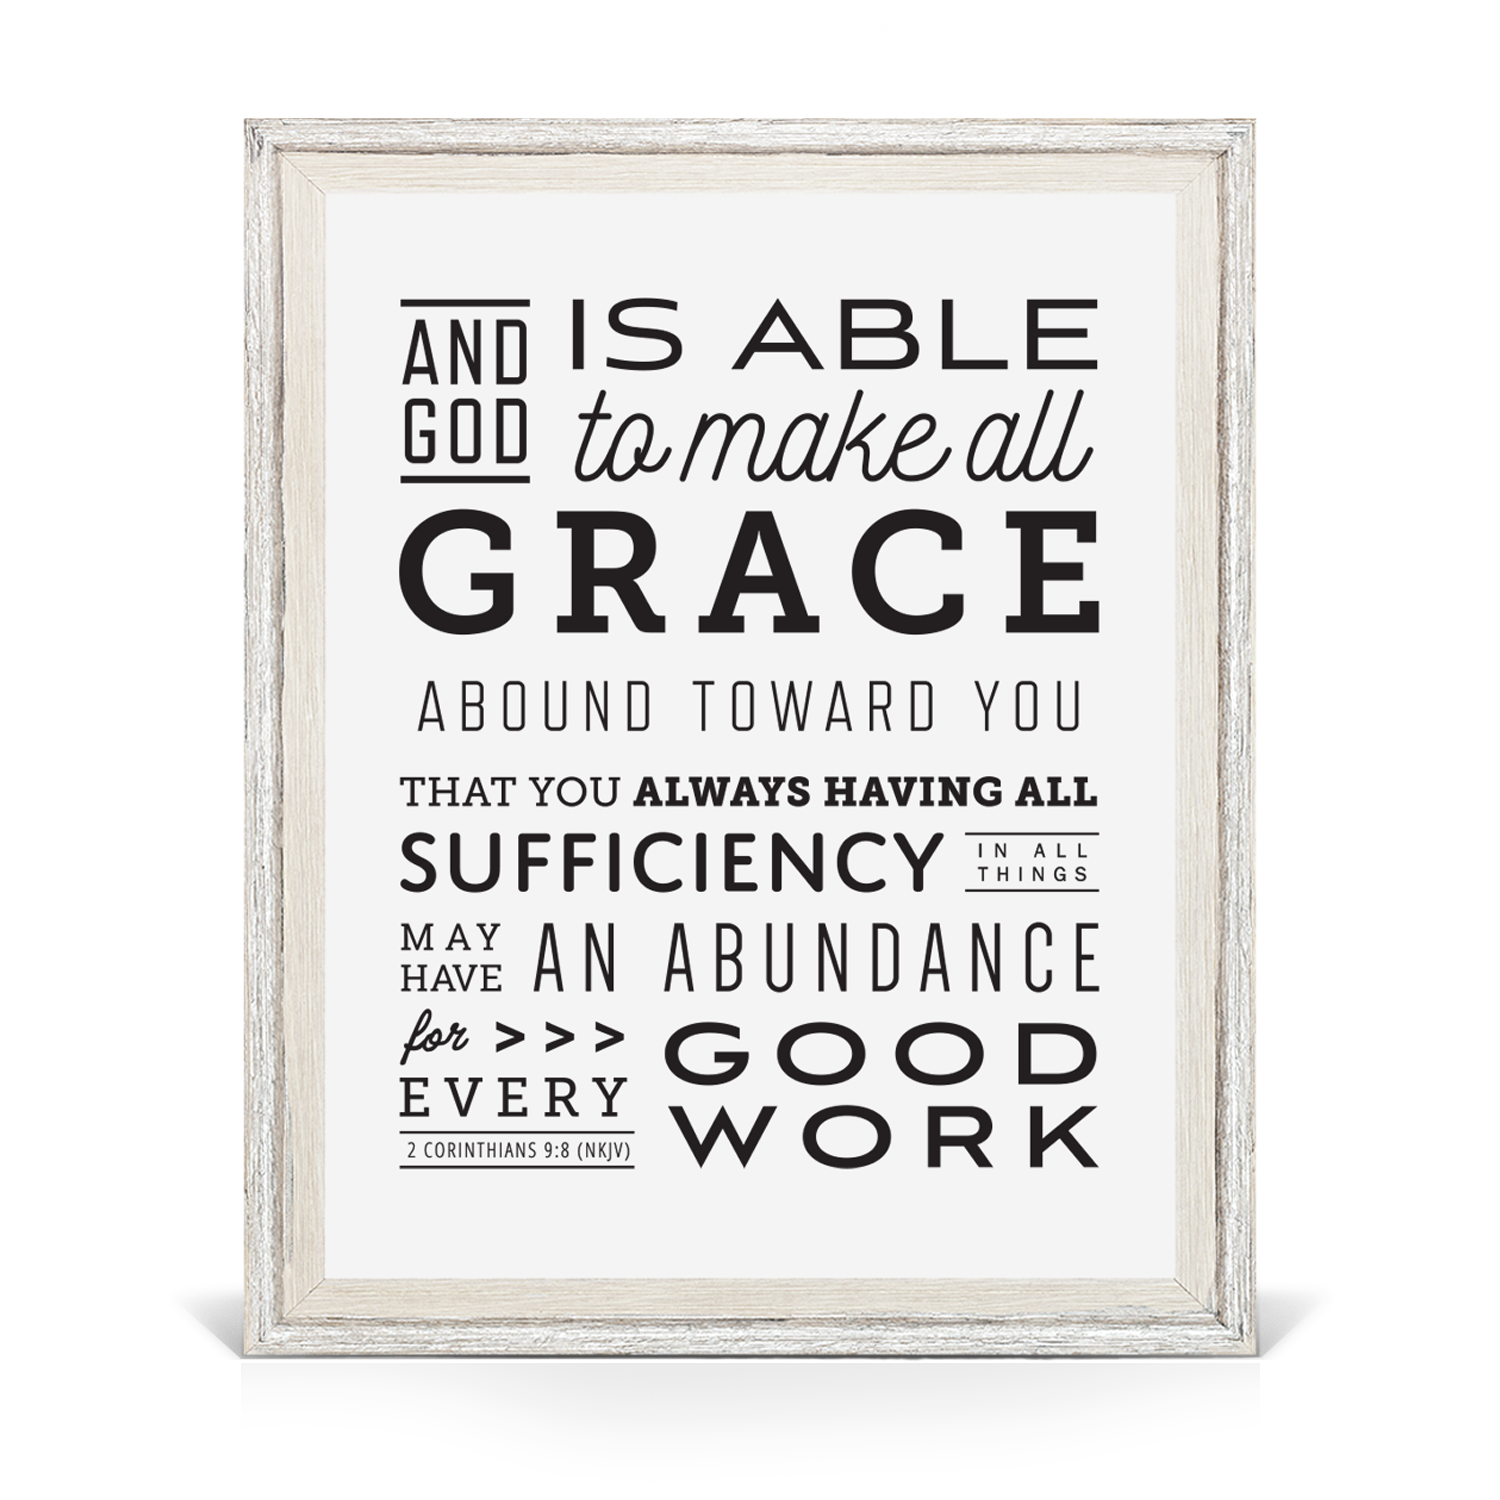 Special Offer: Amazing Grace Art Print